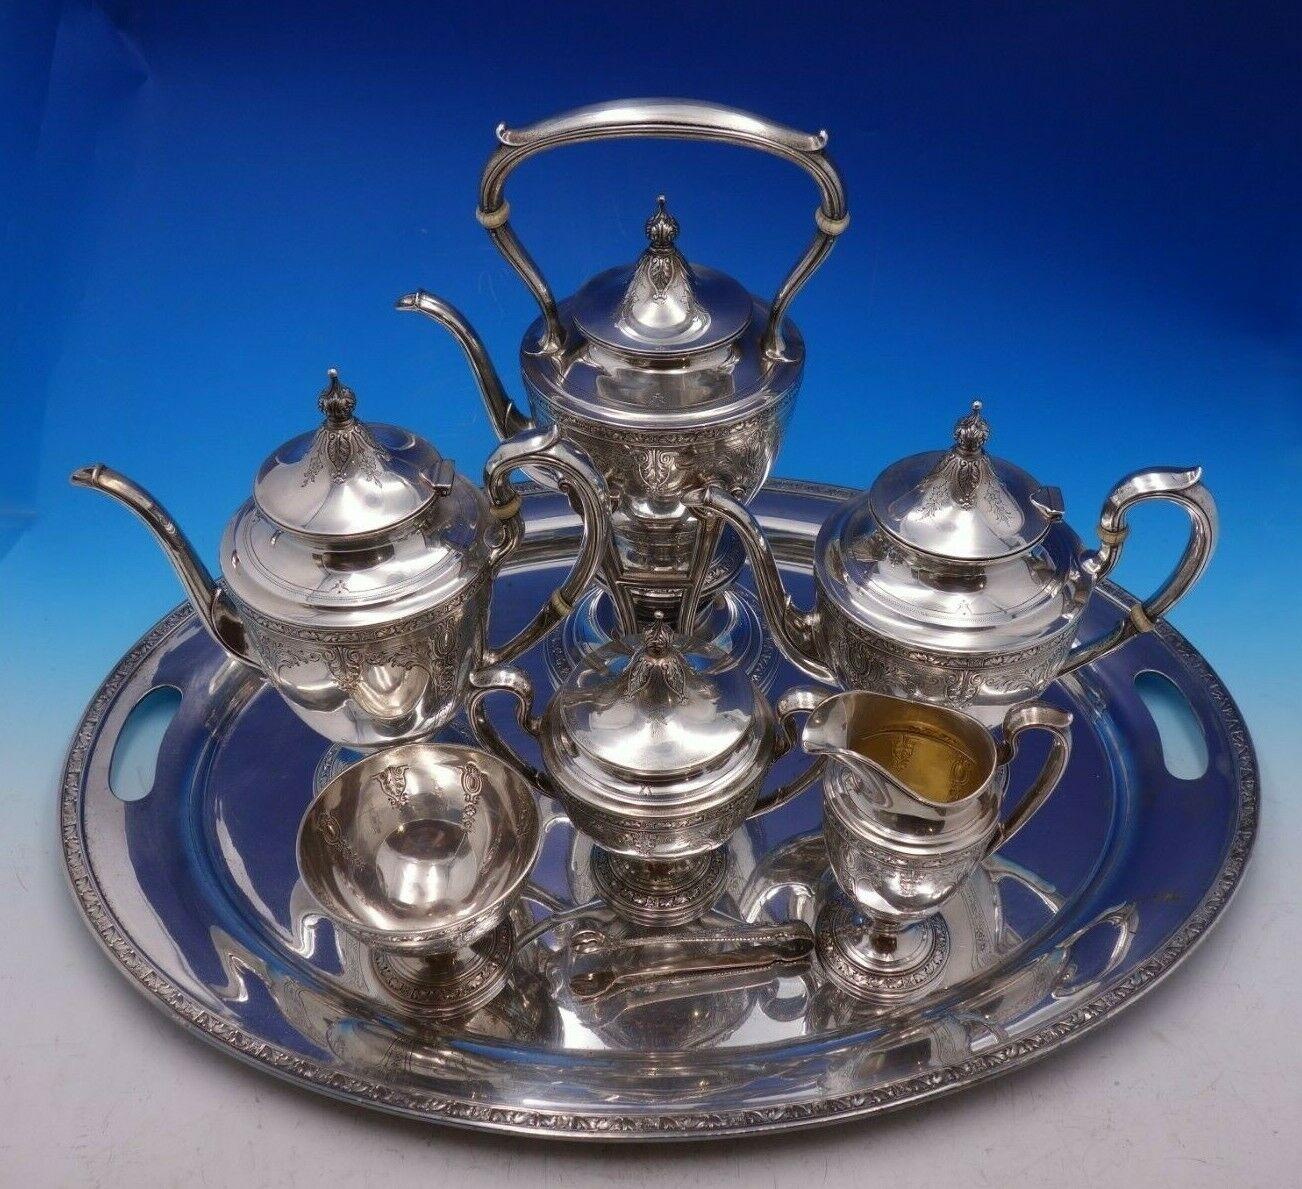 Cinderella by Gorham

Beautiful Cinderella by Gorham sterling silver seven piece tea set with silver plate tray. This set includes:

1 - Kettle on stand: Marked #20206, measures 13 1/2